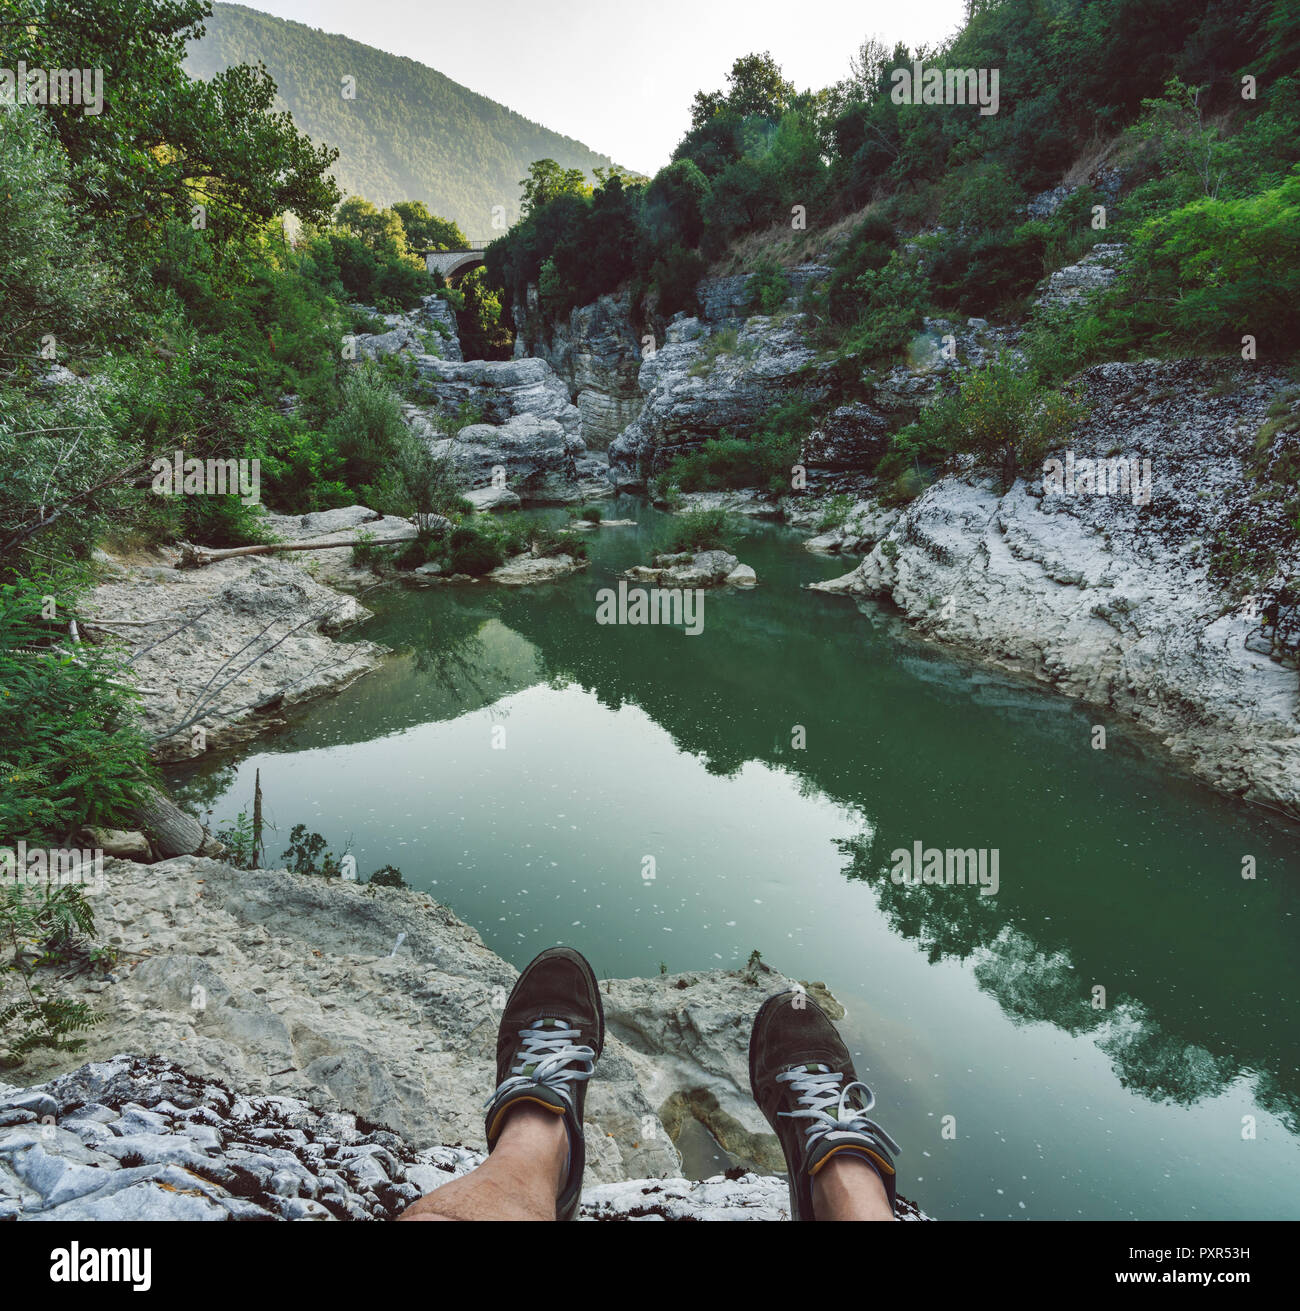 Italy, Marche, Fossombrone, Marmitte dei Giganti canyon, Metauro river, hiker sitting on riverside, shoes Stock Photo